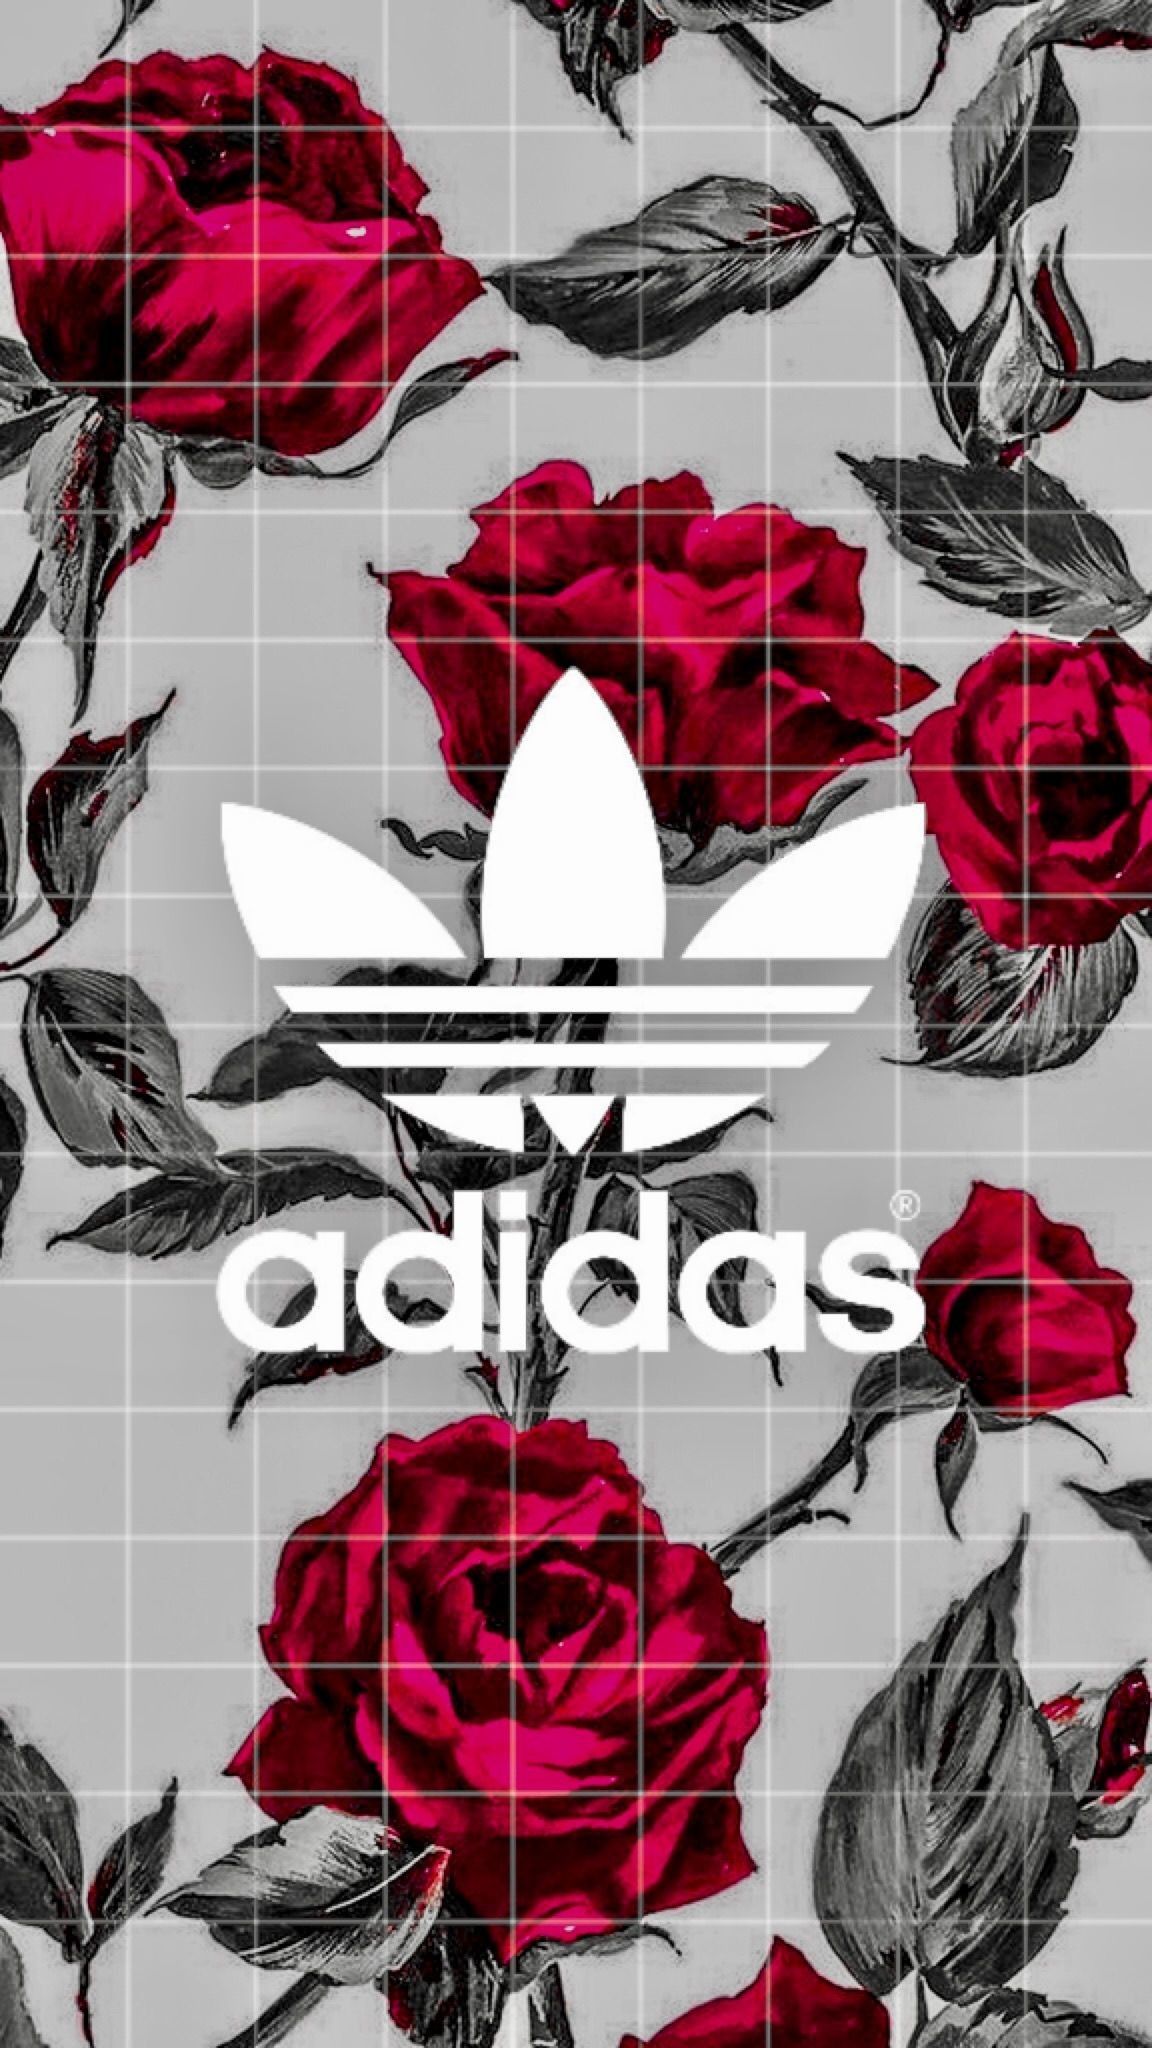 Cool 3D Adidas Wallpapers on WallpaperDog